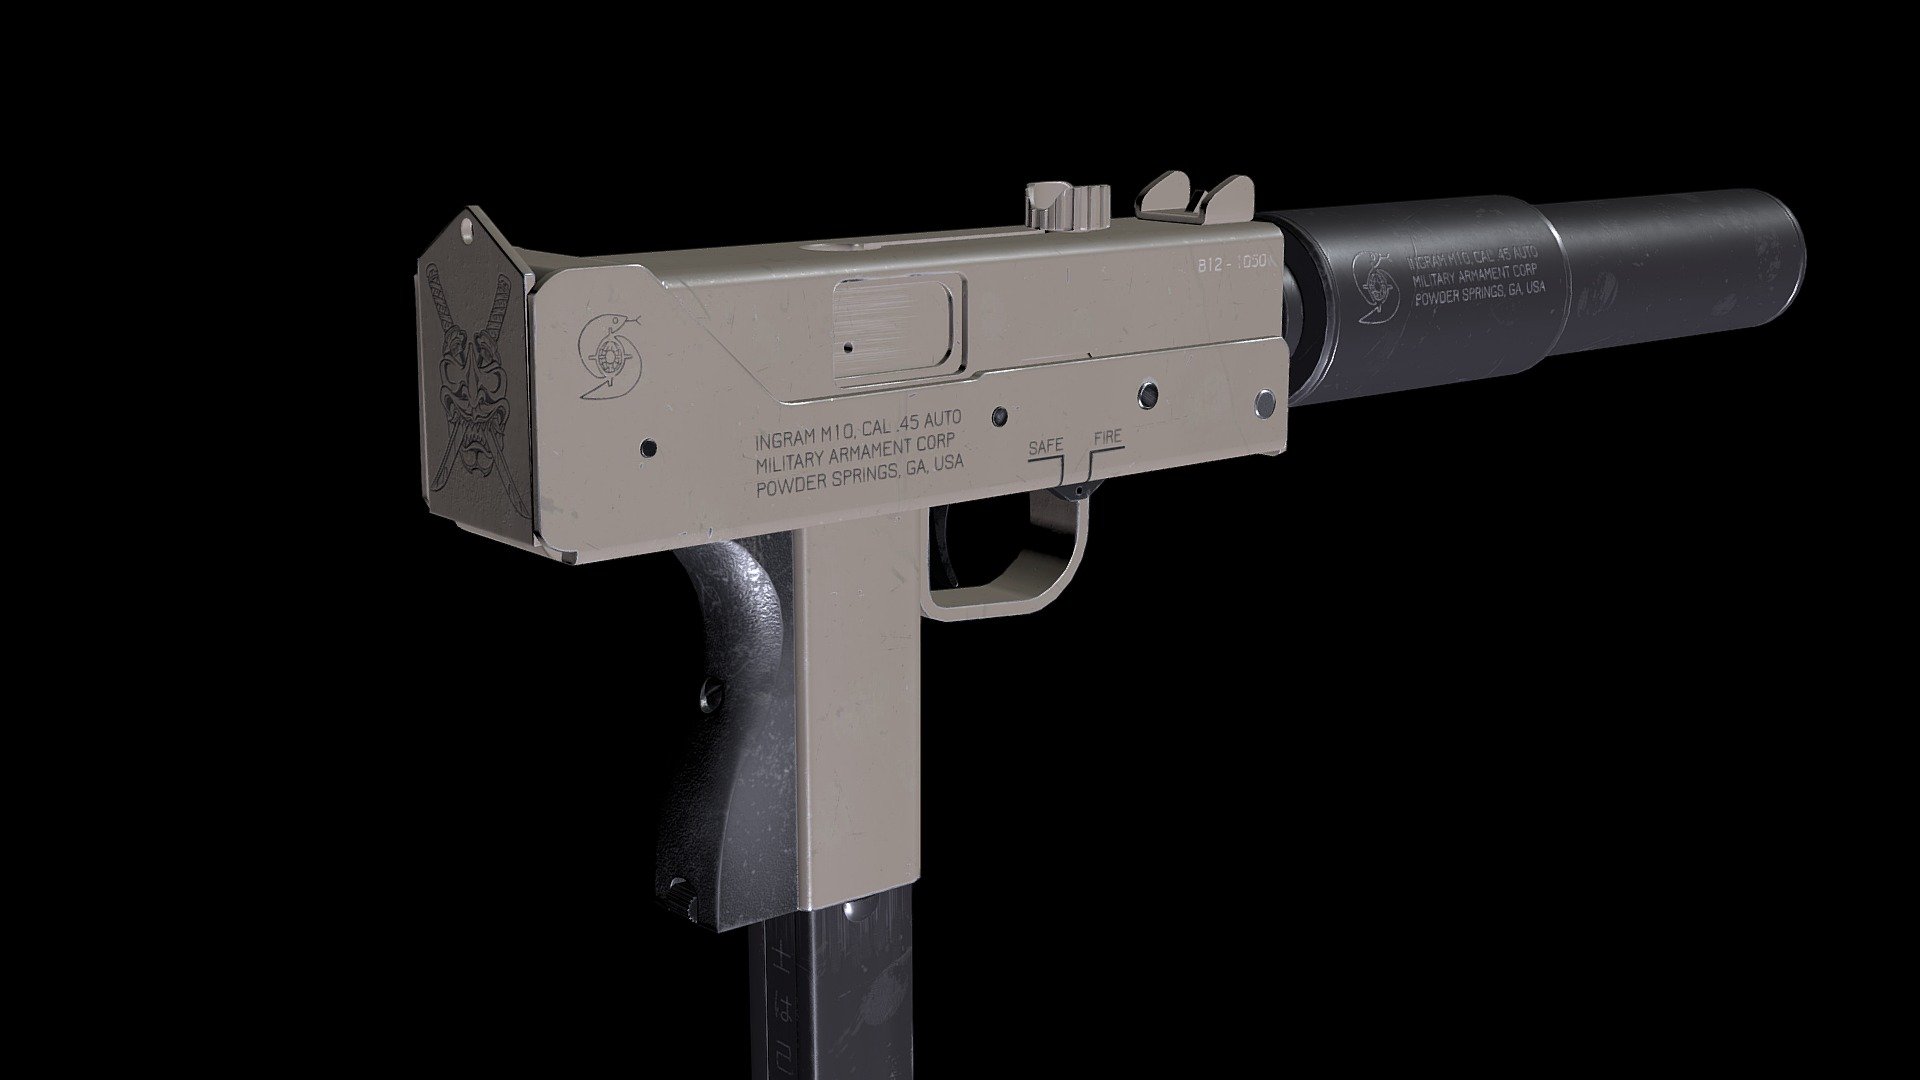 Hi there,
This is my first project, which is a Mac-10. This submachine gun is iconic and that's why I decided to work on it. One 4k texture, 8014 tris.
Special thanks to Artem Komonov, who helped me a lot in the implementation of my project 3d model